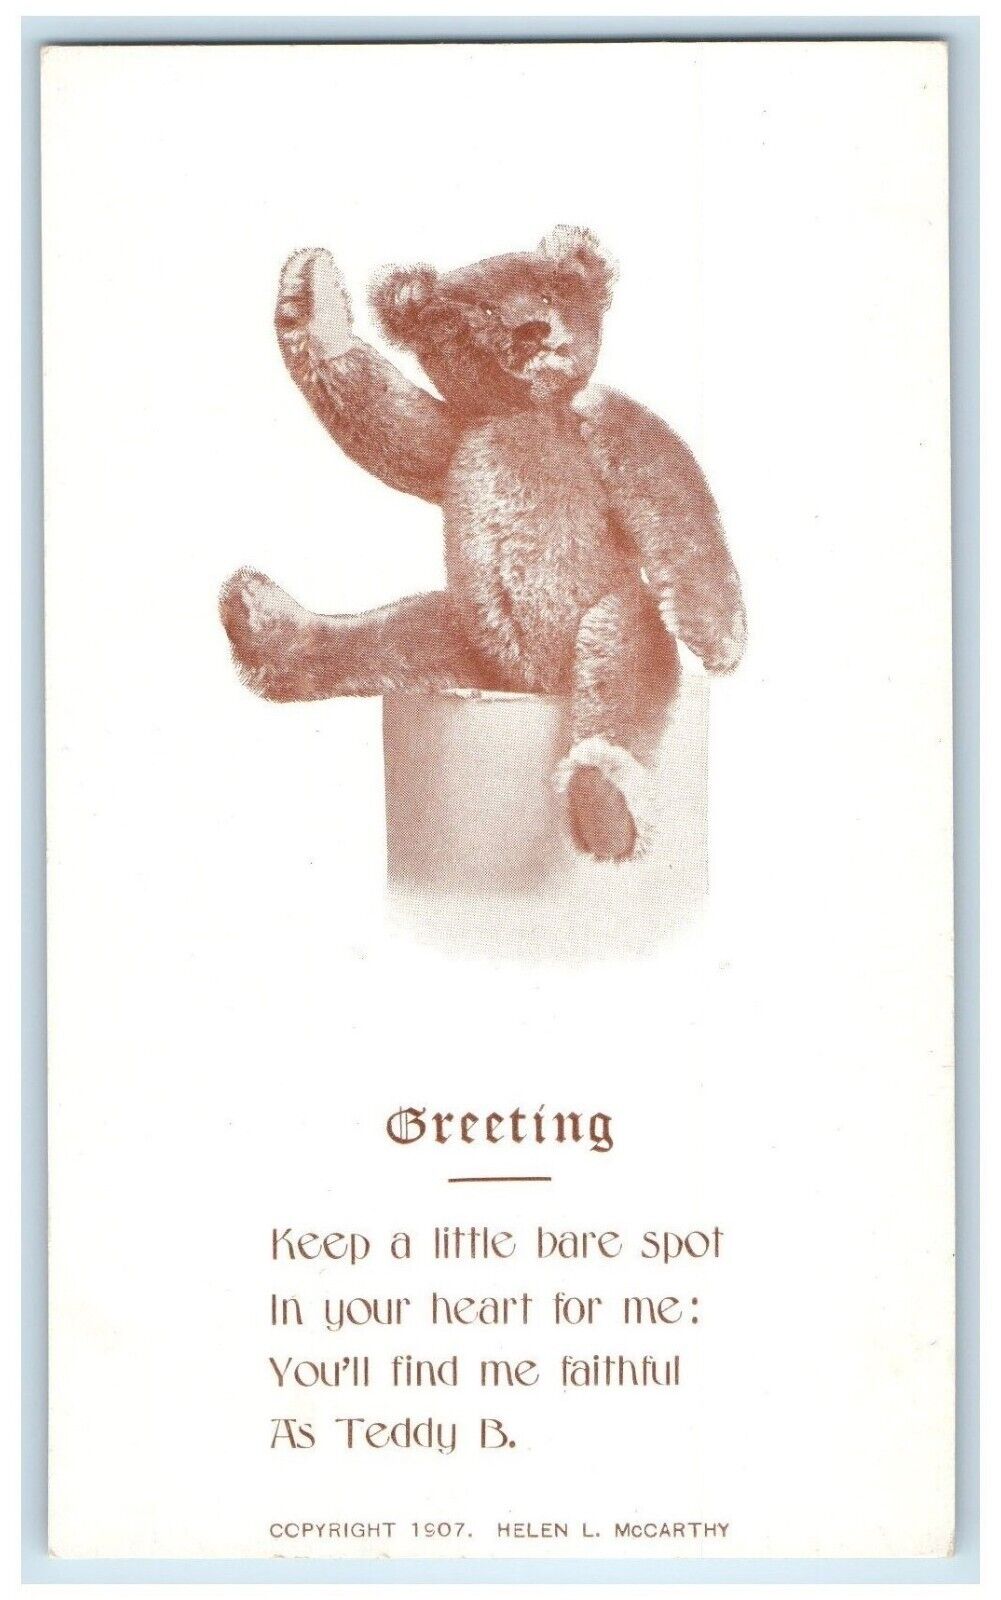 c1905 Greeting Little Bare Spot In Your Heart For Me Teddy Bear Antique Postcard